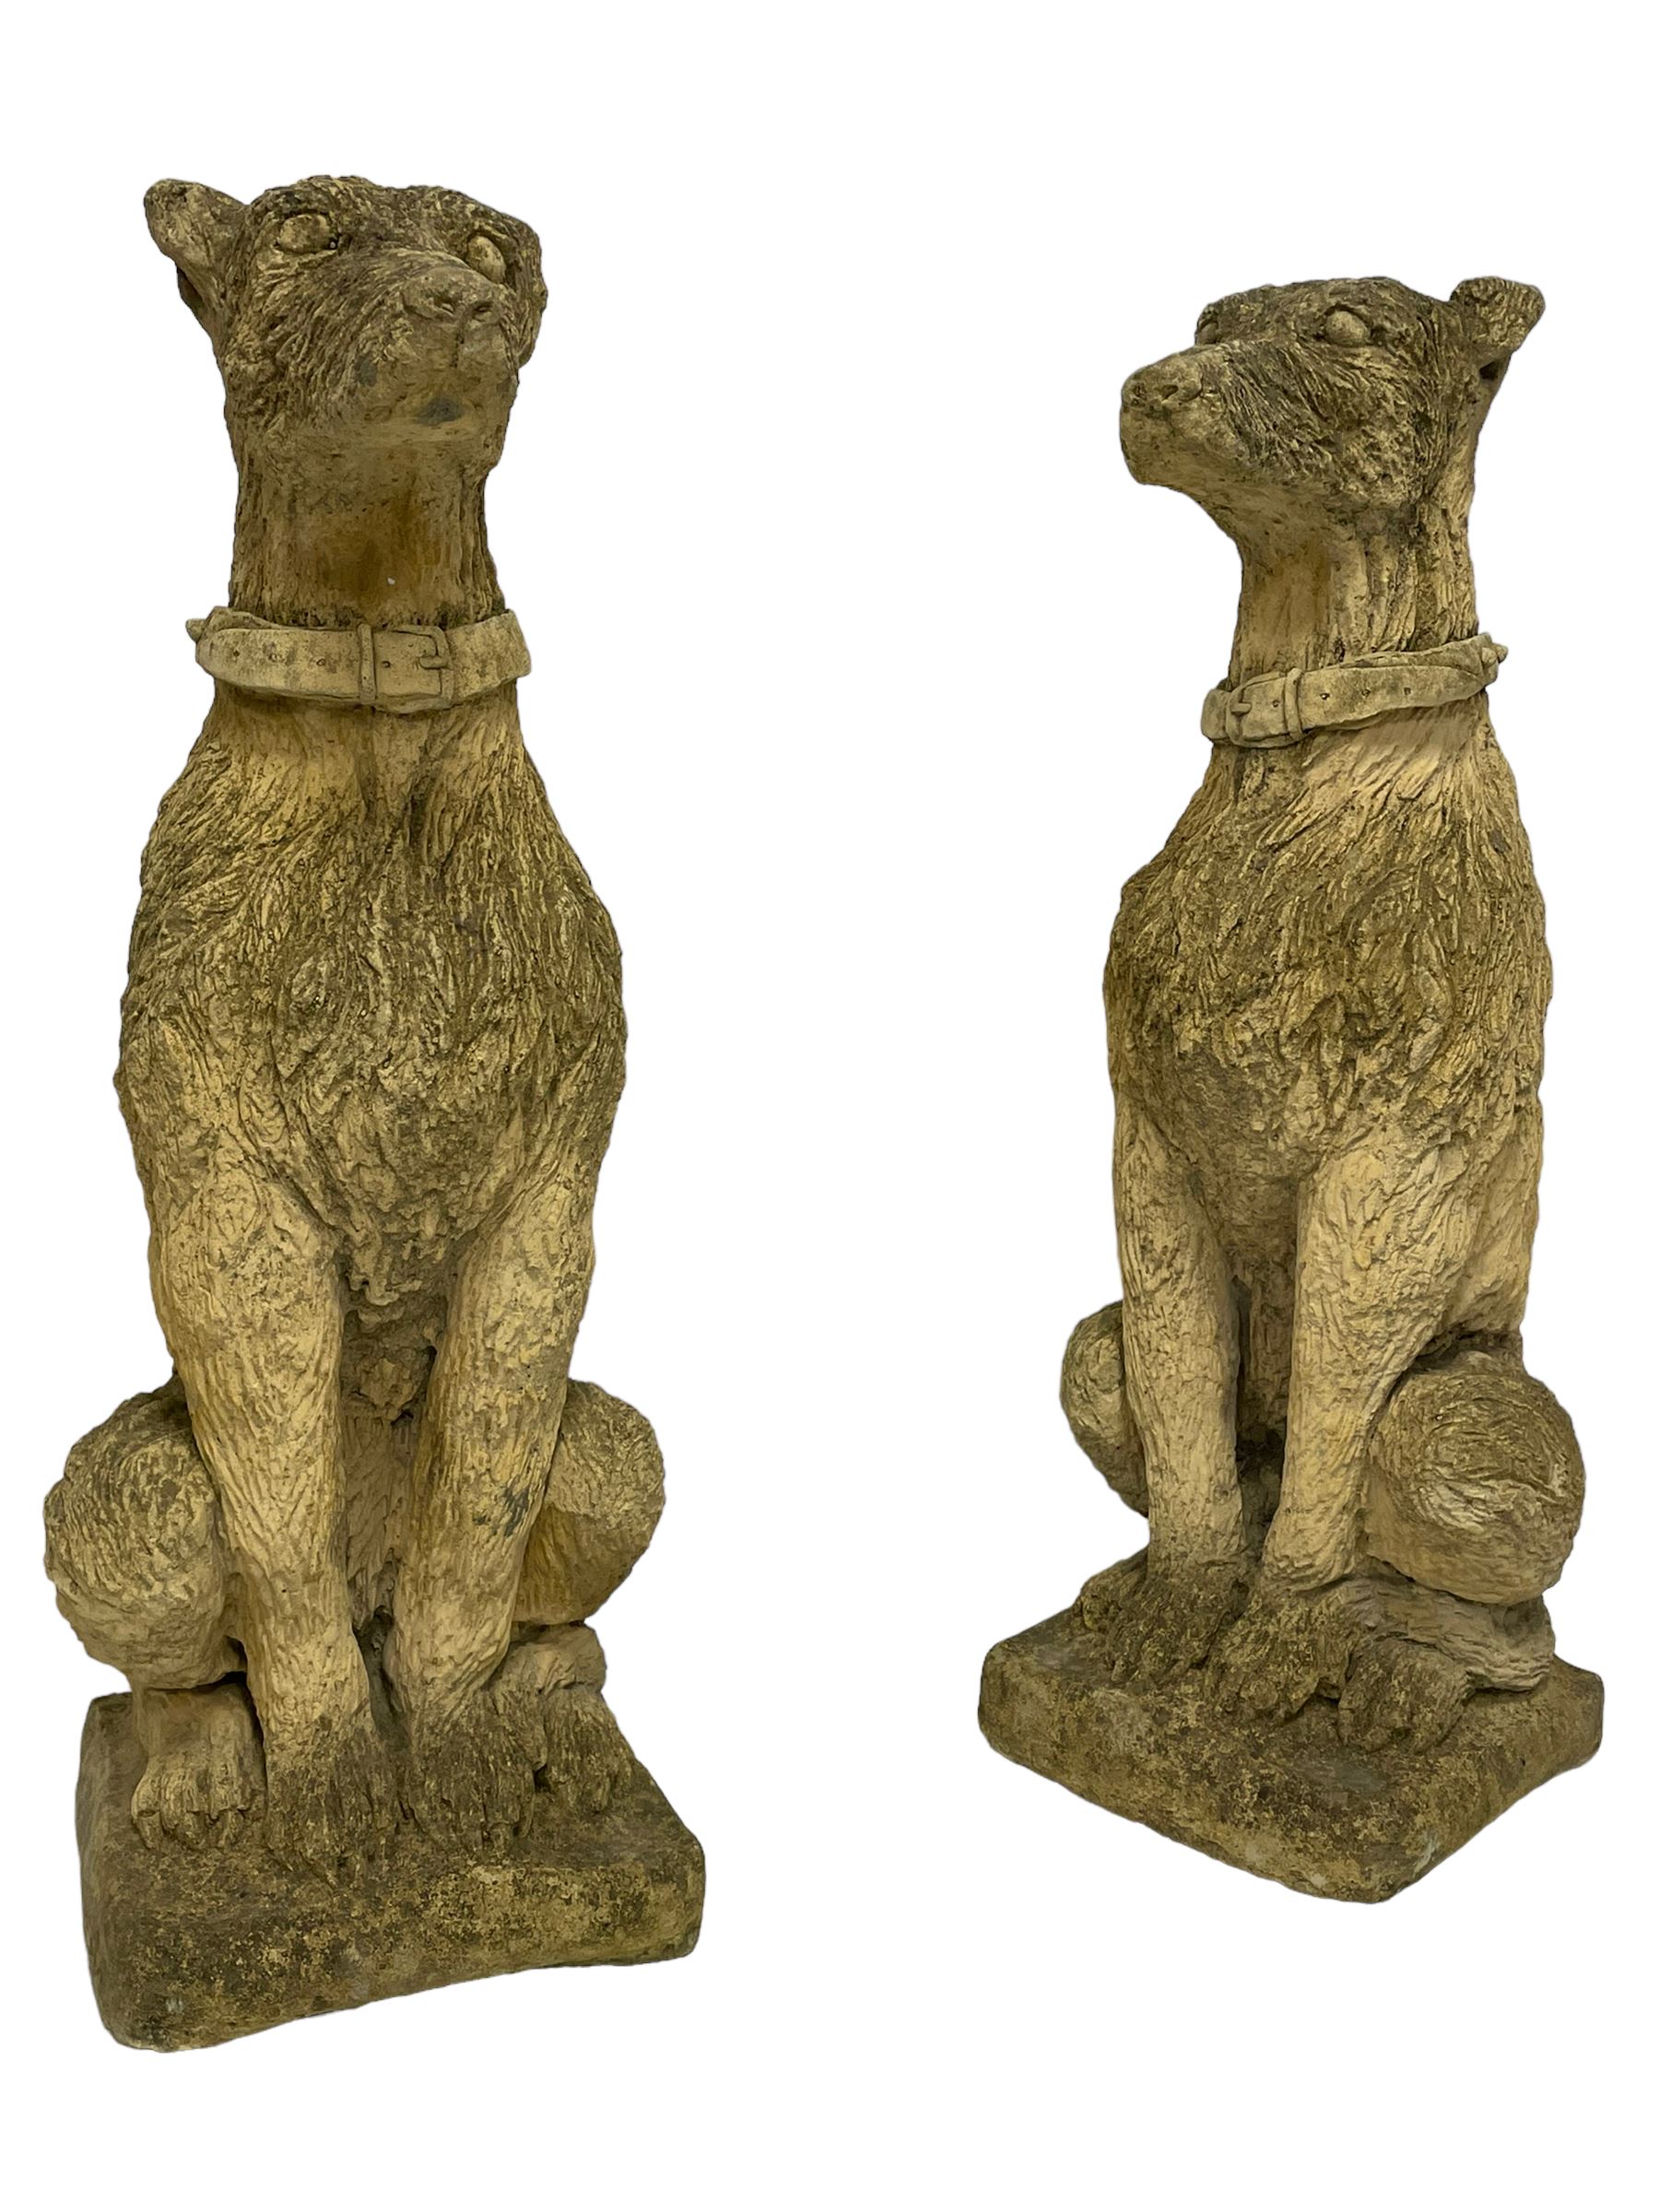 Pair of composite stone garden ornaments in the form of seated lurchers - Image 2 of 8